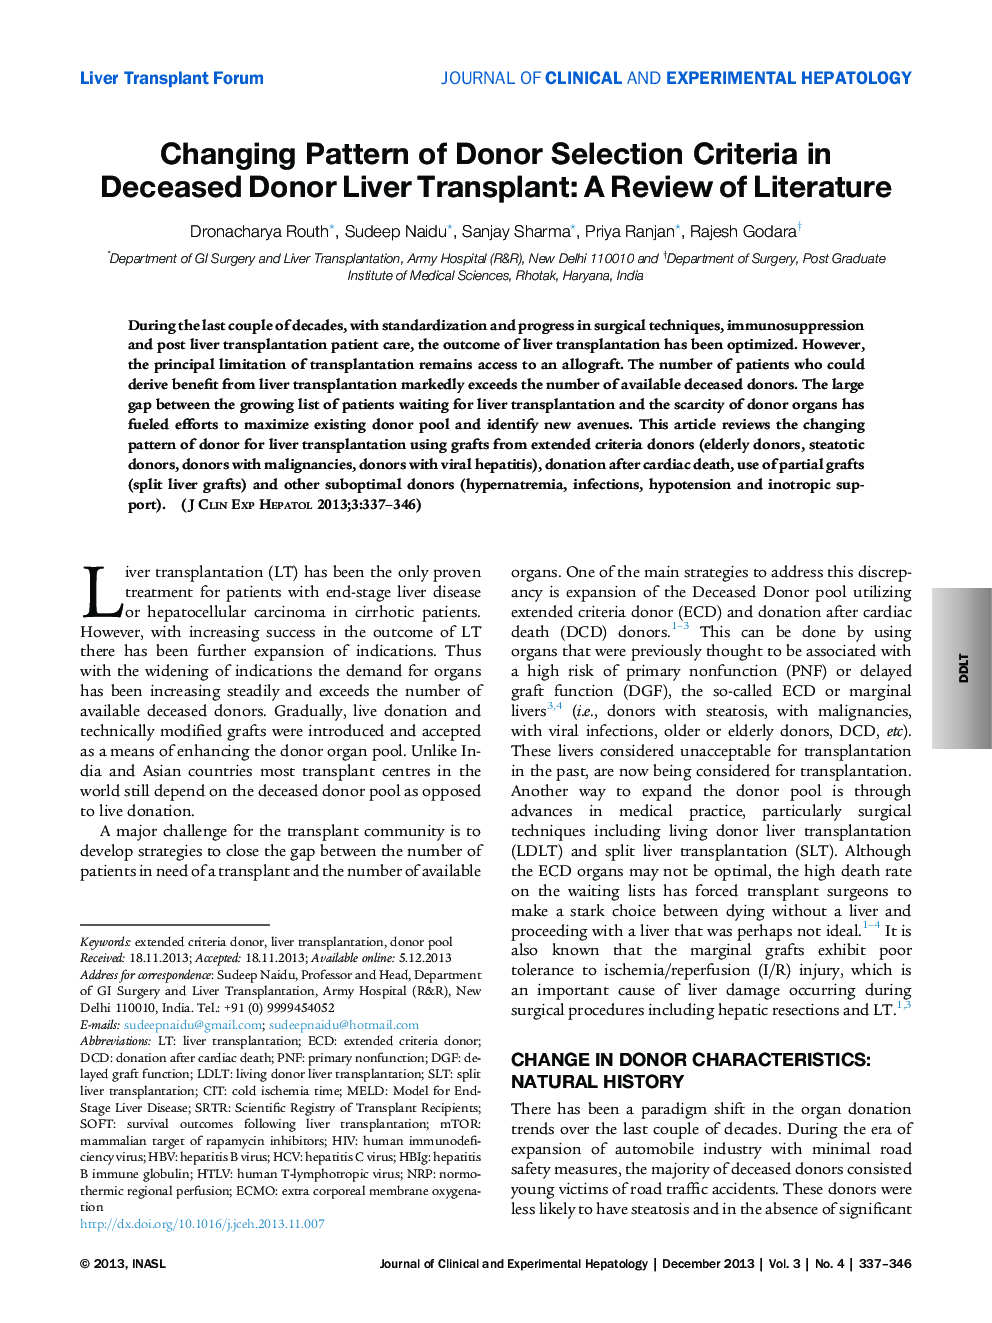 Changing Pattern of Donor Selection Criteria in Deceased Donor Liver Transplant: A Review of Literature